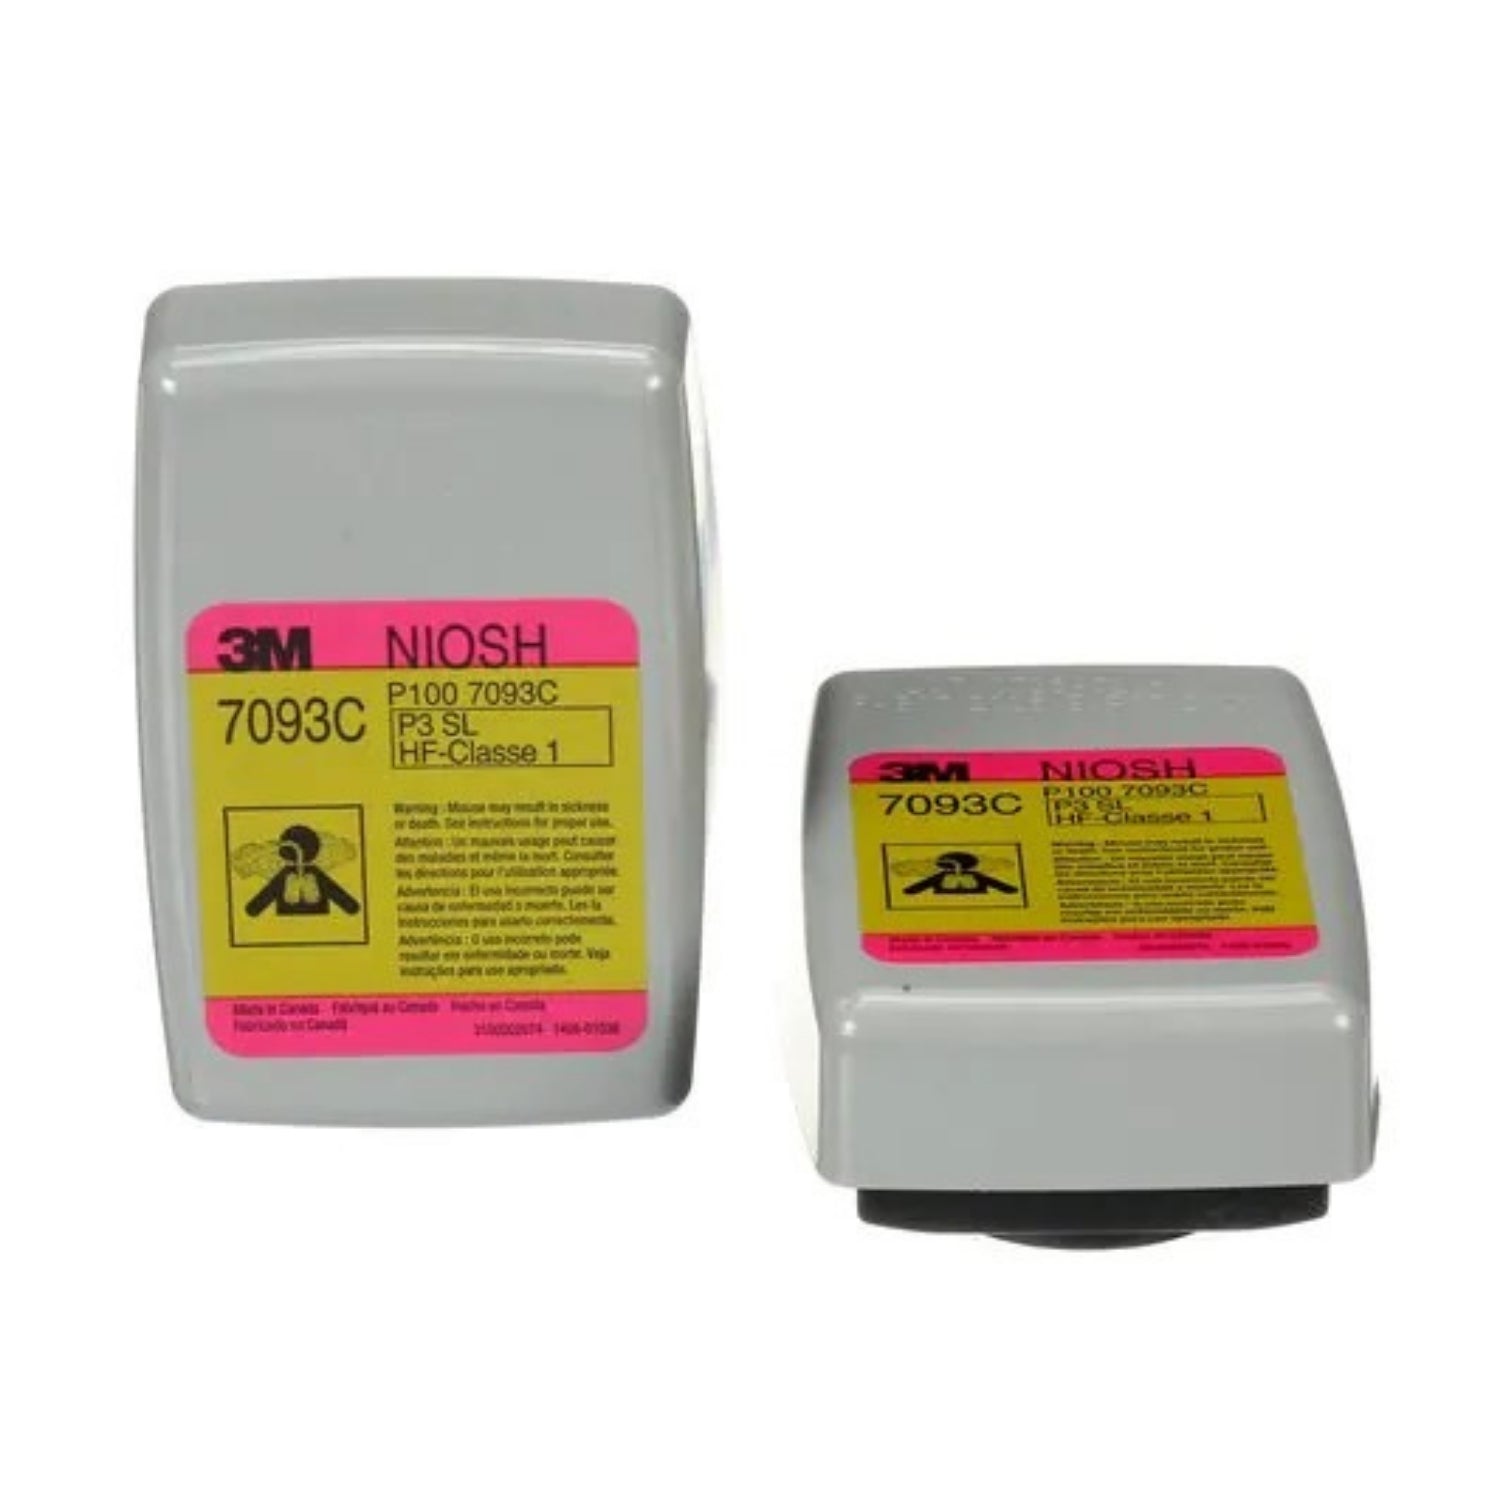 3M™ Hydrogen Fluoride Cartridge/Filter 7093CB, P100, with Nuisance Level Organic Vapor and Acid Gas Relief